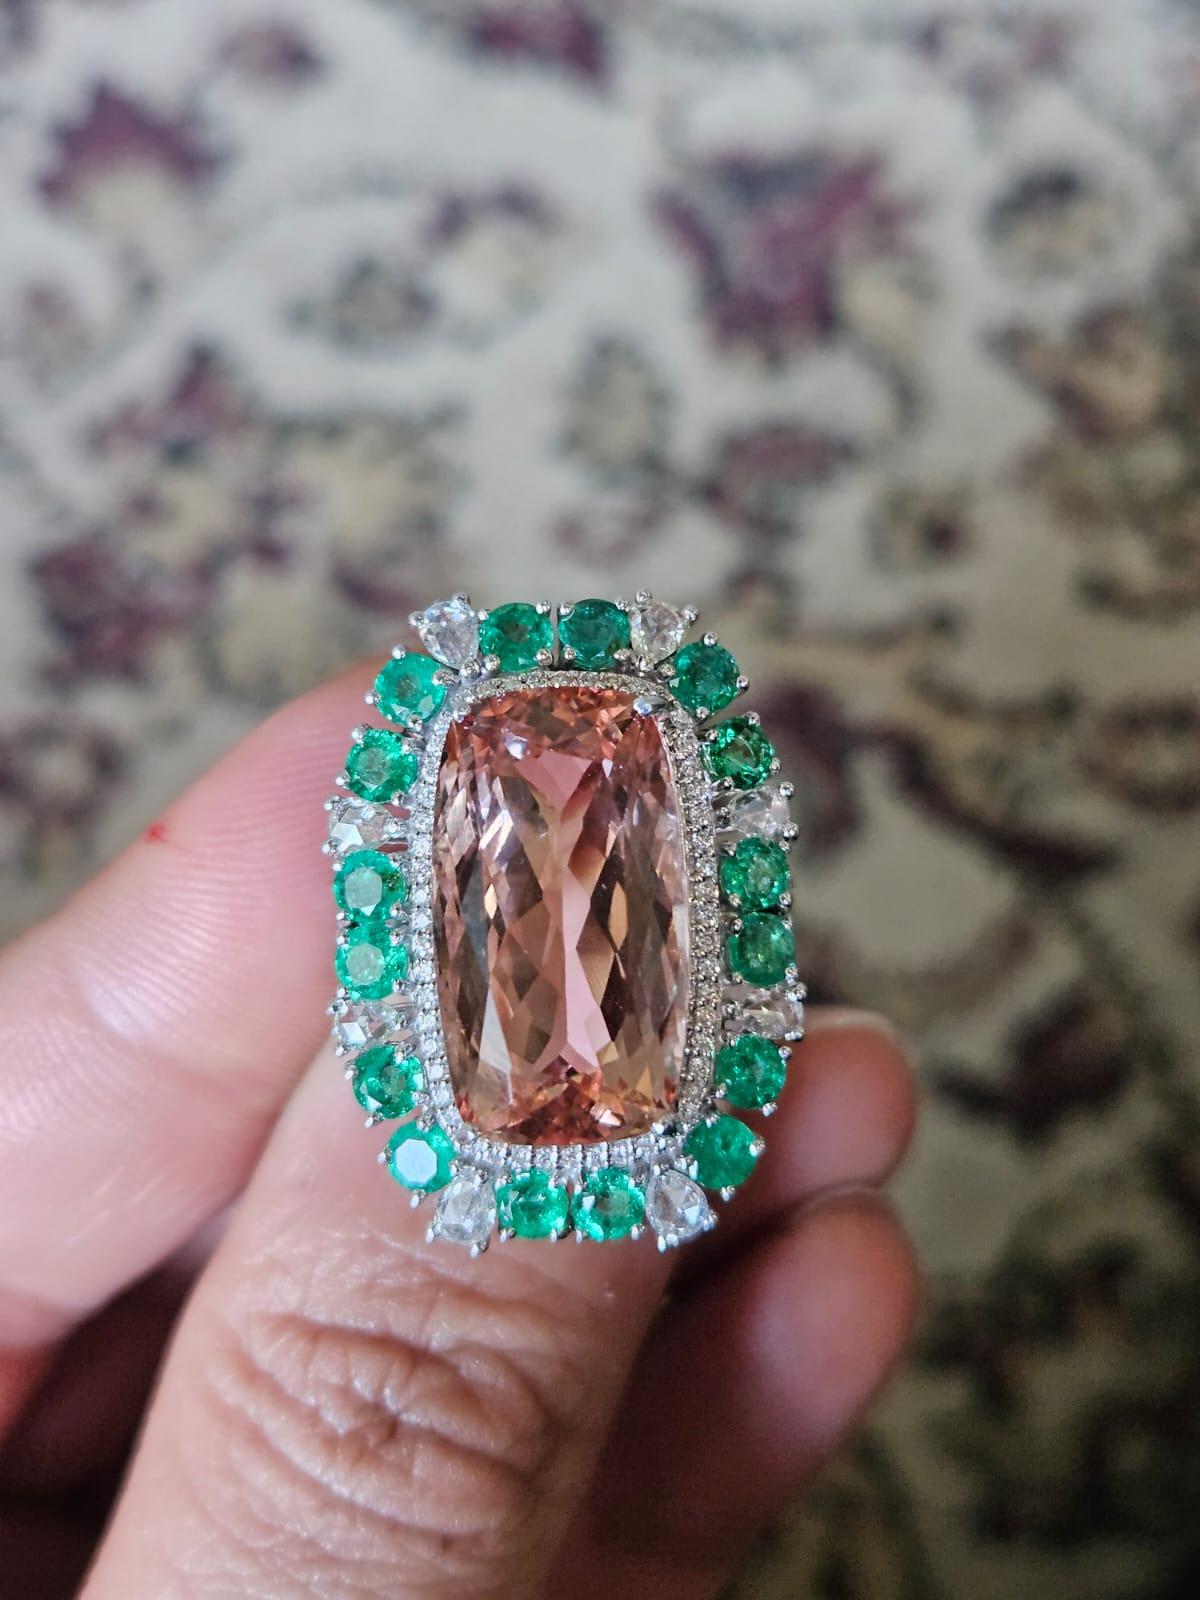 A very gorgeous and beautiful, Morganite & Emerald Cocktail Ring set in 18K Gold & diamonds. The weight of the Morganite is 13.37 carats. The weight of the Emeralds is 2.07 carats. The Emeralds are completely natural, without any treatment and are